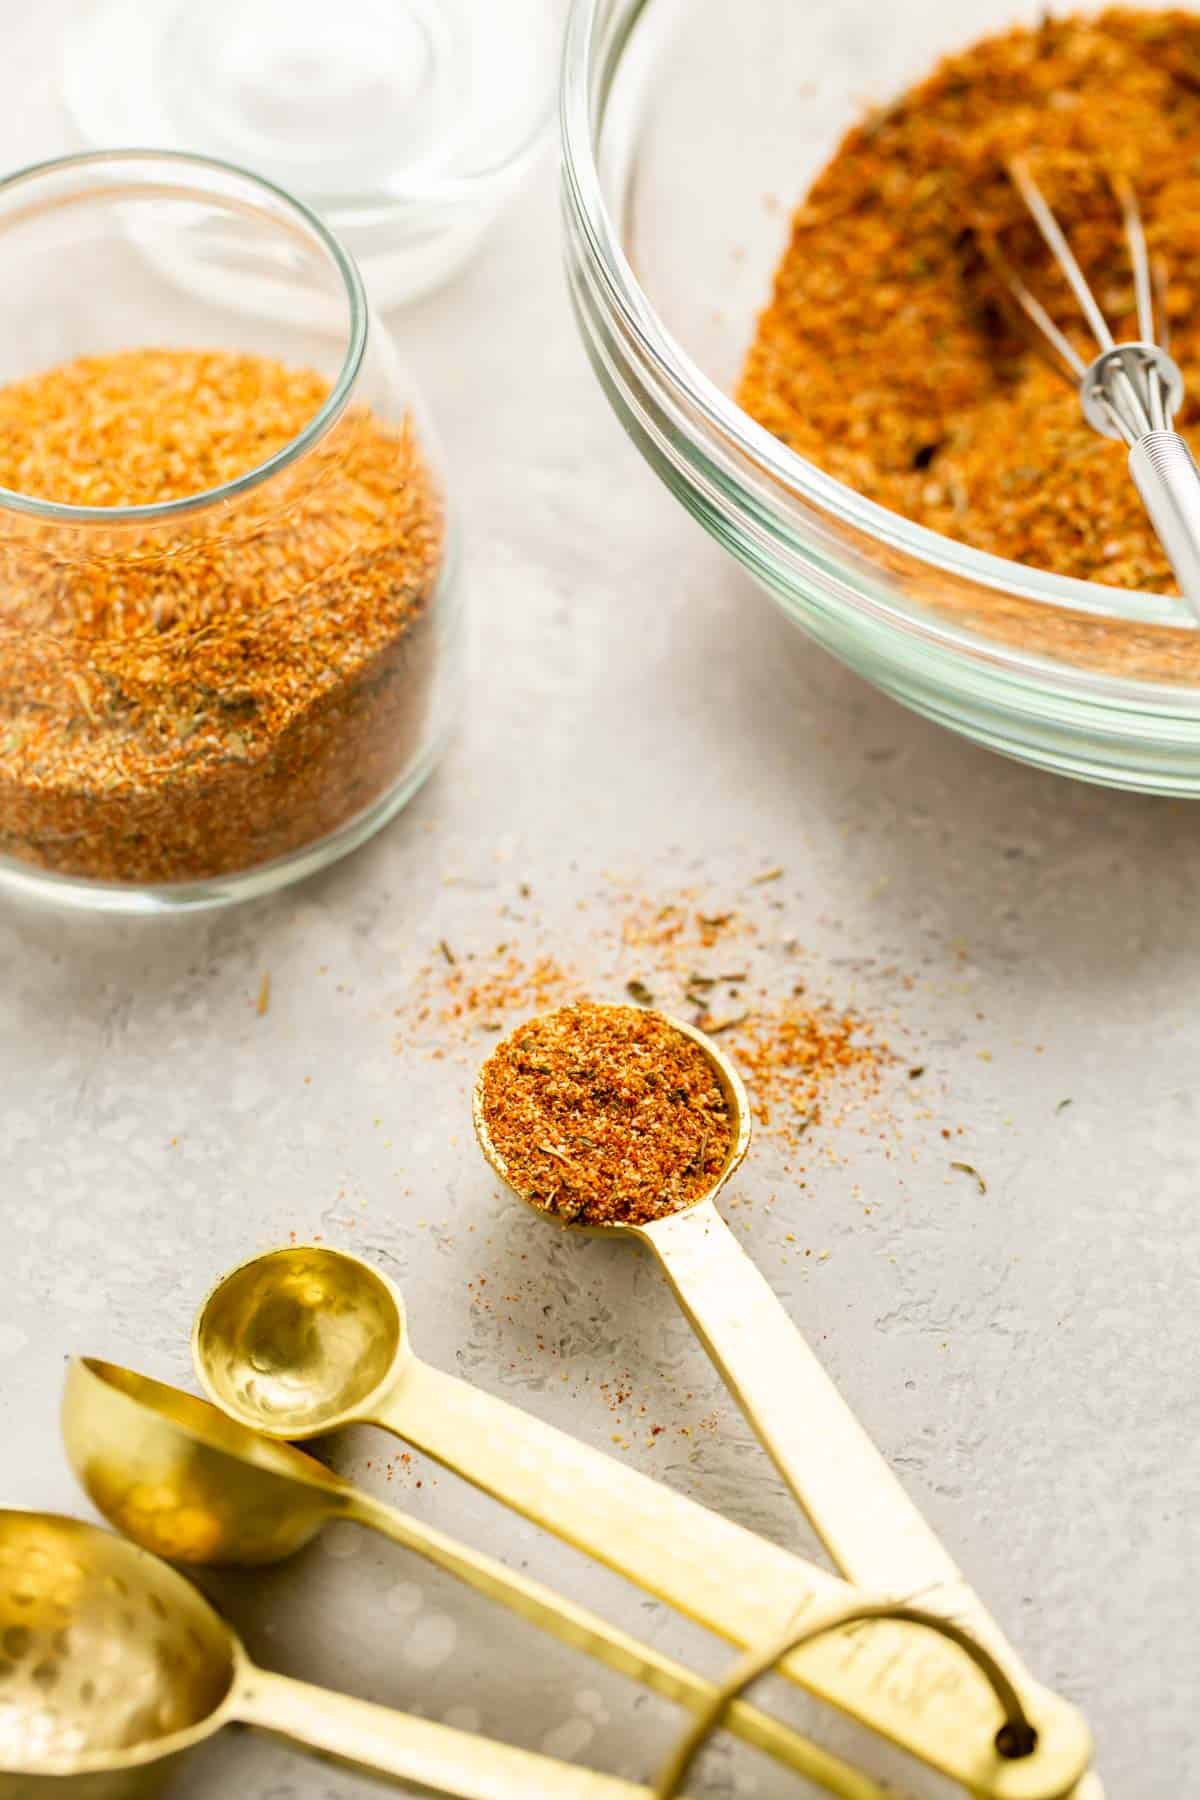 seafood seasoning on a gold teaspoon next to glasses of other seafood seasoning mix